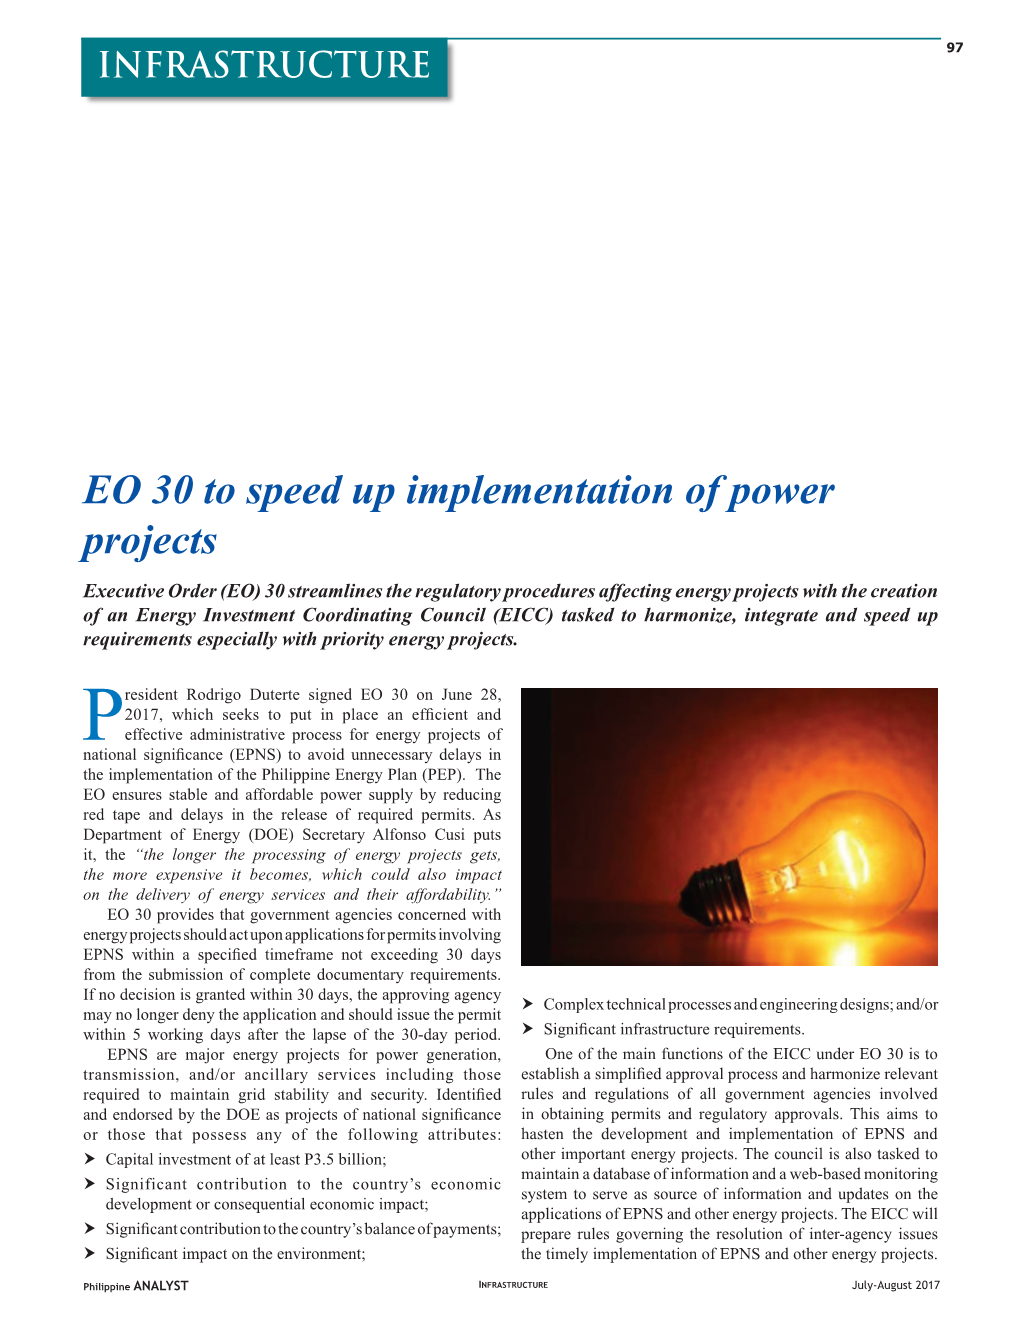 EO 30 to Speed up Implementation of Power Projects